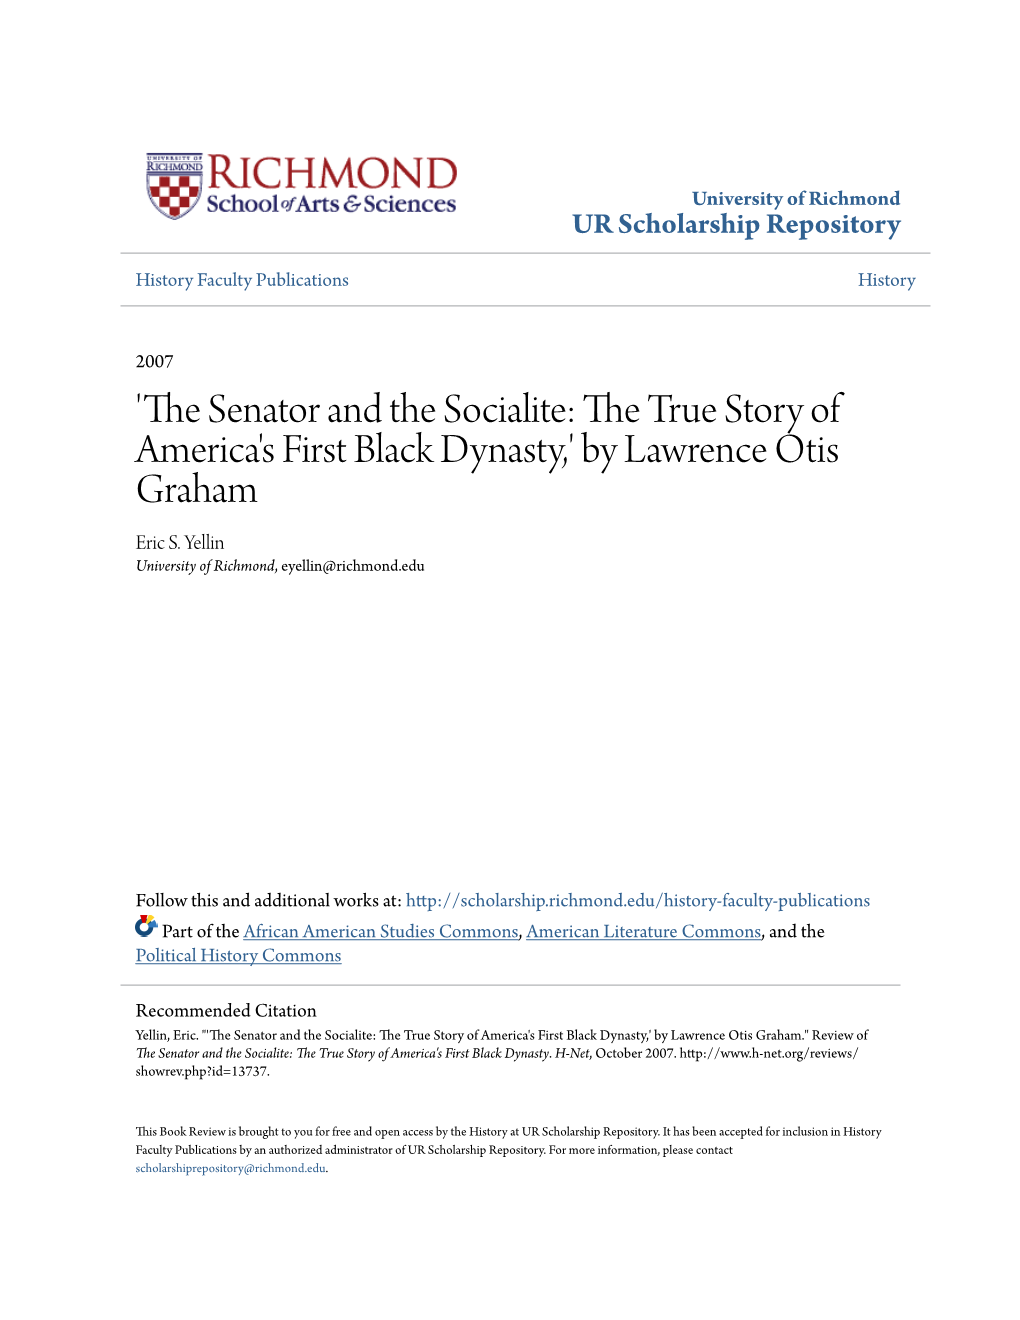 'The Senator and the Socialite: the True Story of America's First Black